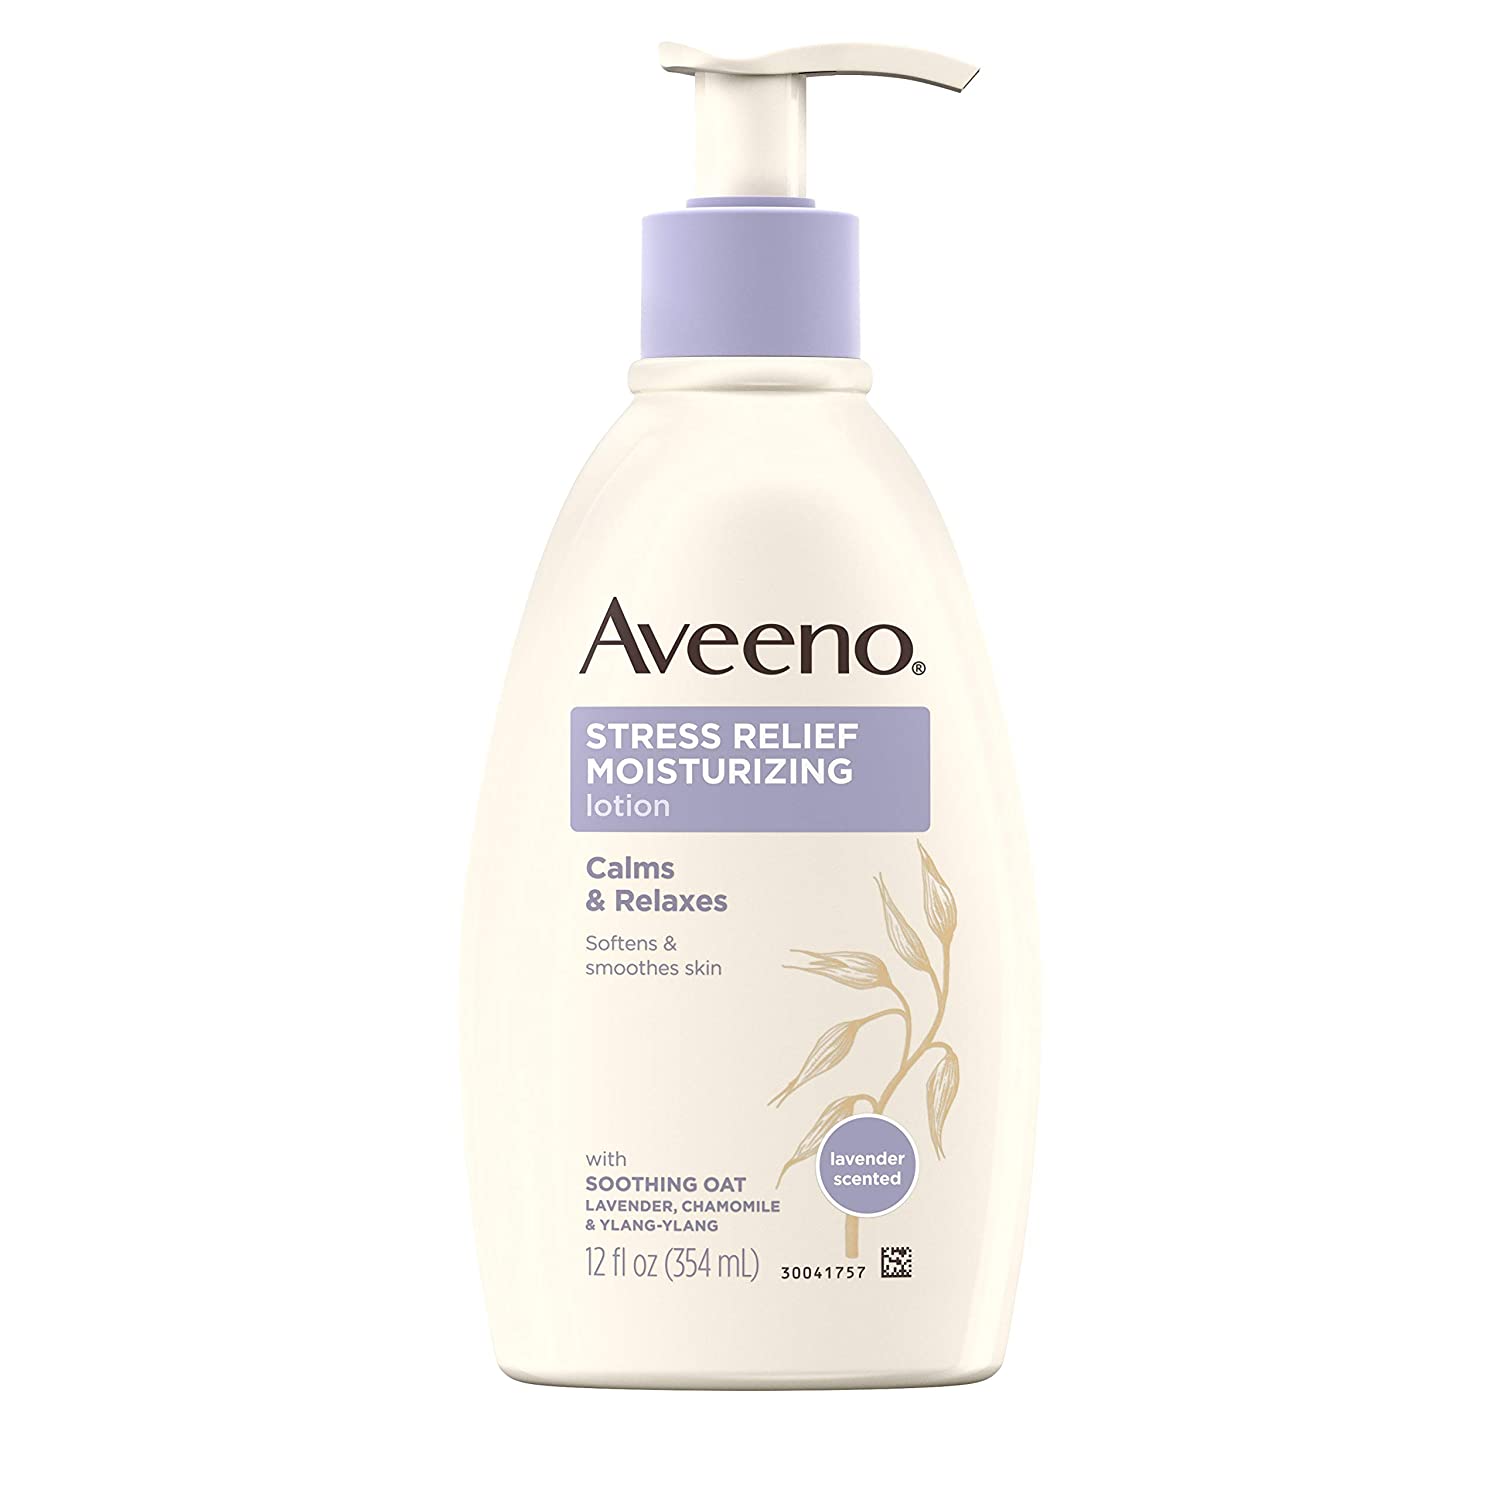 Aveeno Stress Relief Moisturizing Body Lotion with Lavender, Natural Oatmeal and Chamomile & Ylang-Ylang Essential Oils to Calm & Relax, 12 fl. oz